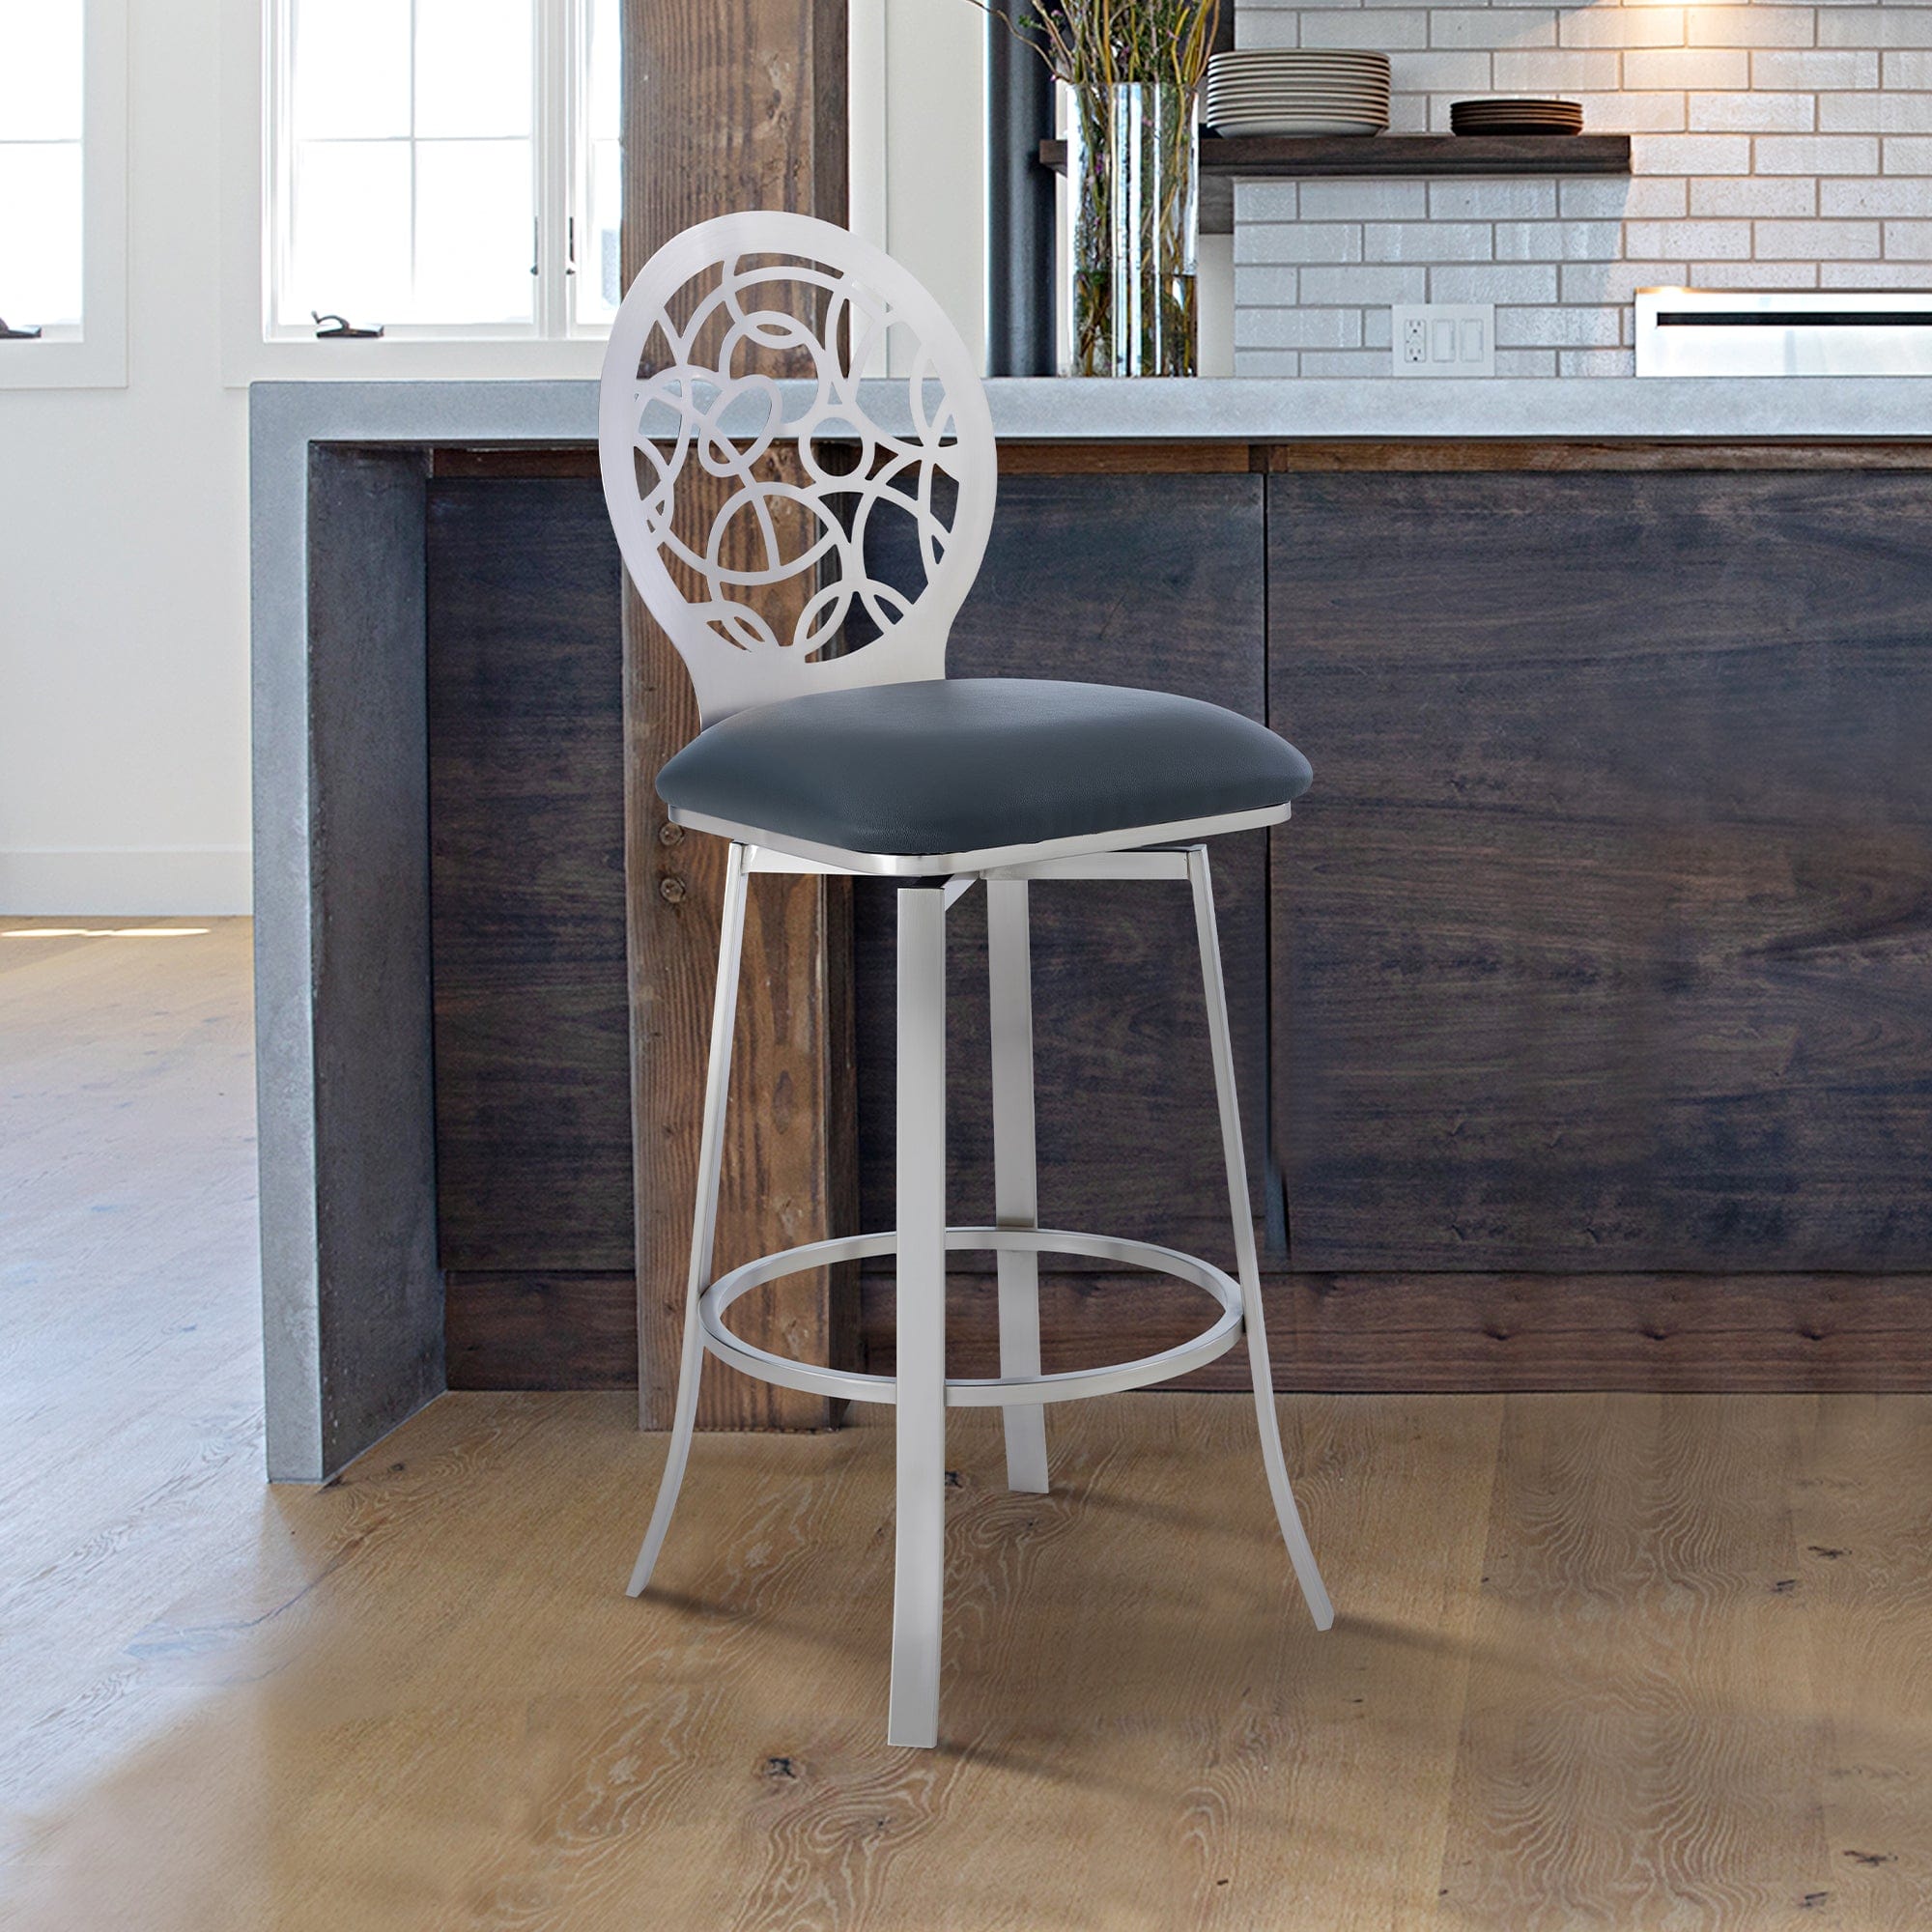 Armen Living Barstool Armen Living - Lotus Contemporary 30" Bar Height Barstool in Brushed Stainless Steel Finish and Gray Faux Leather | LCLTBABSGR30